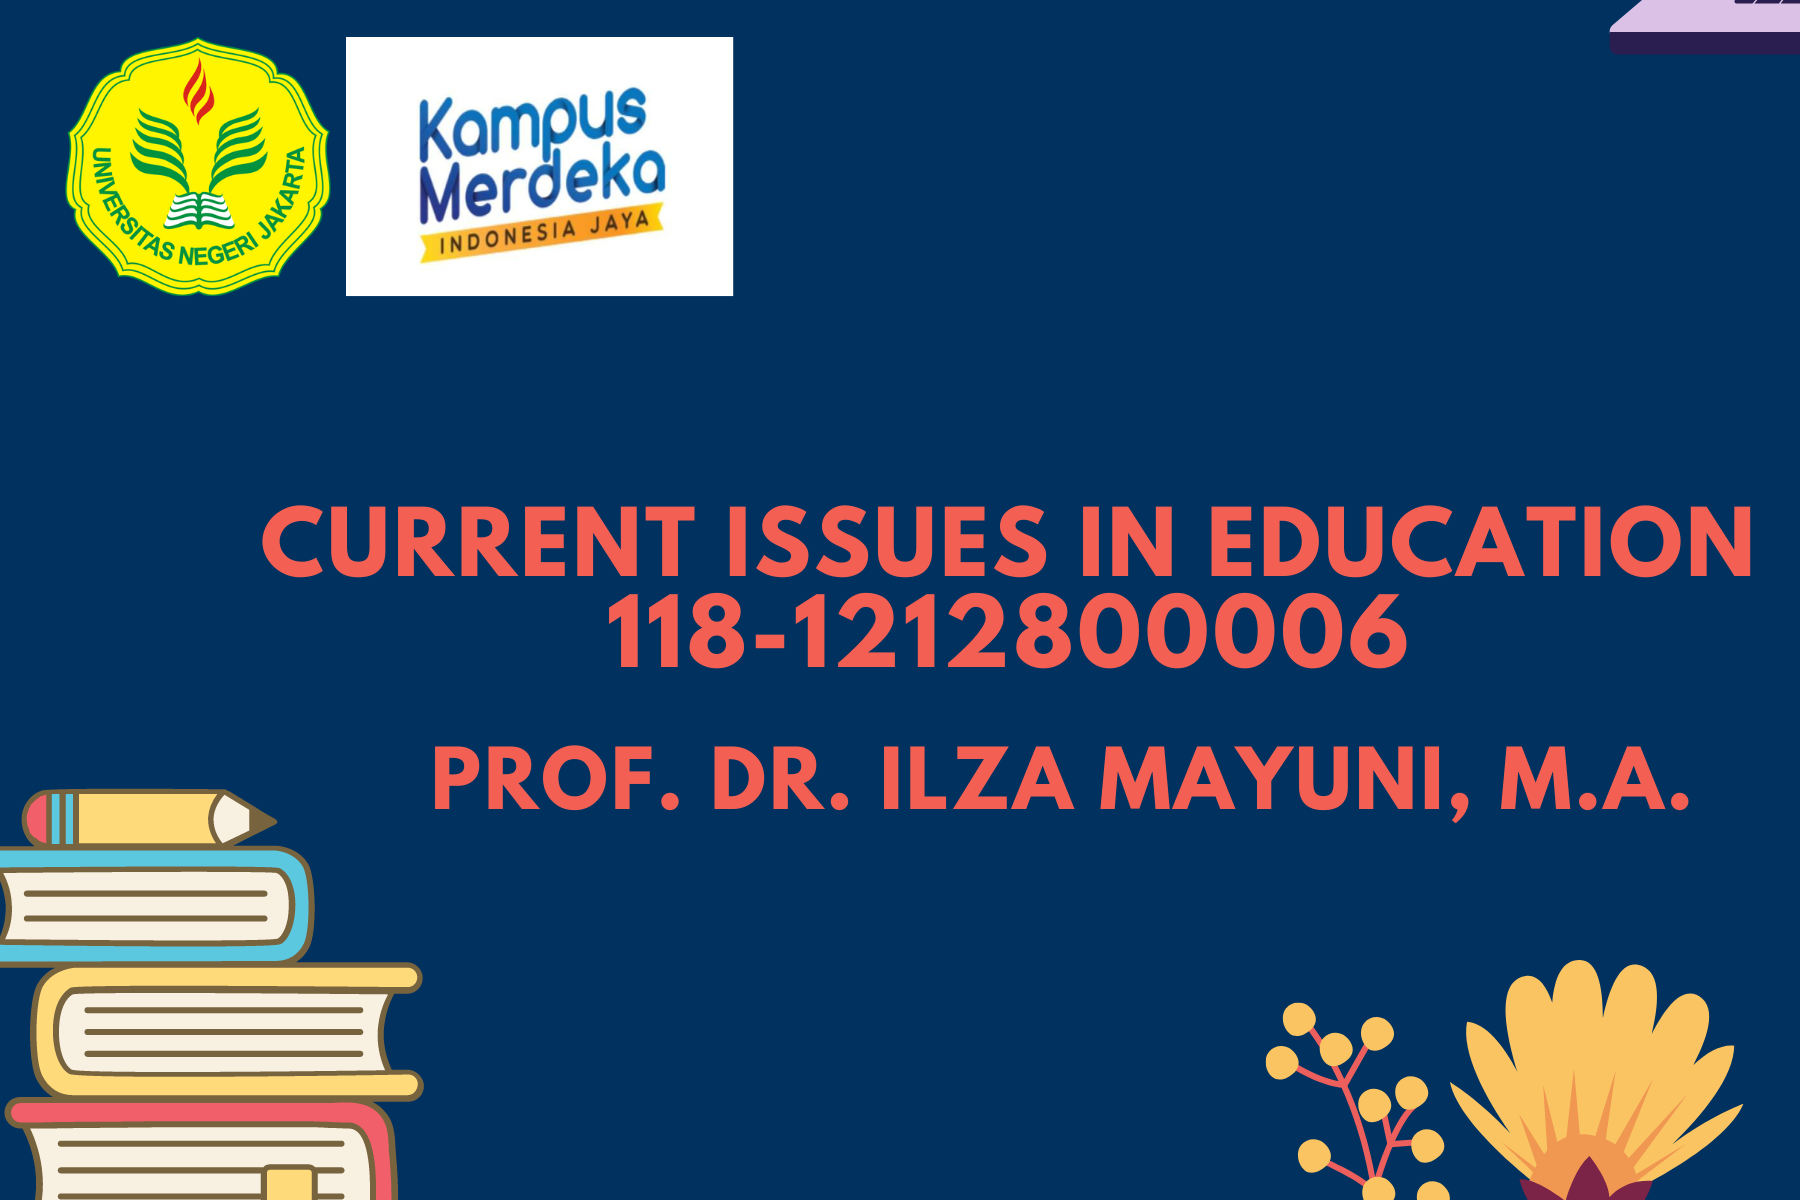 Current Issues in Education (118-1212800006)